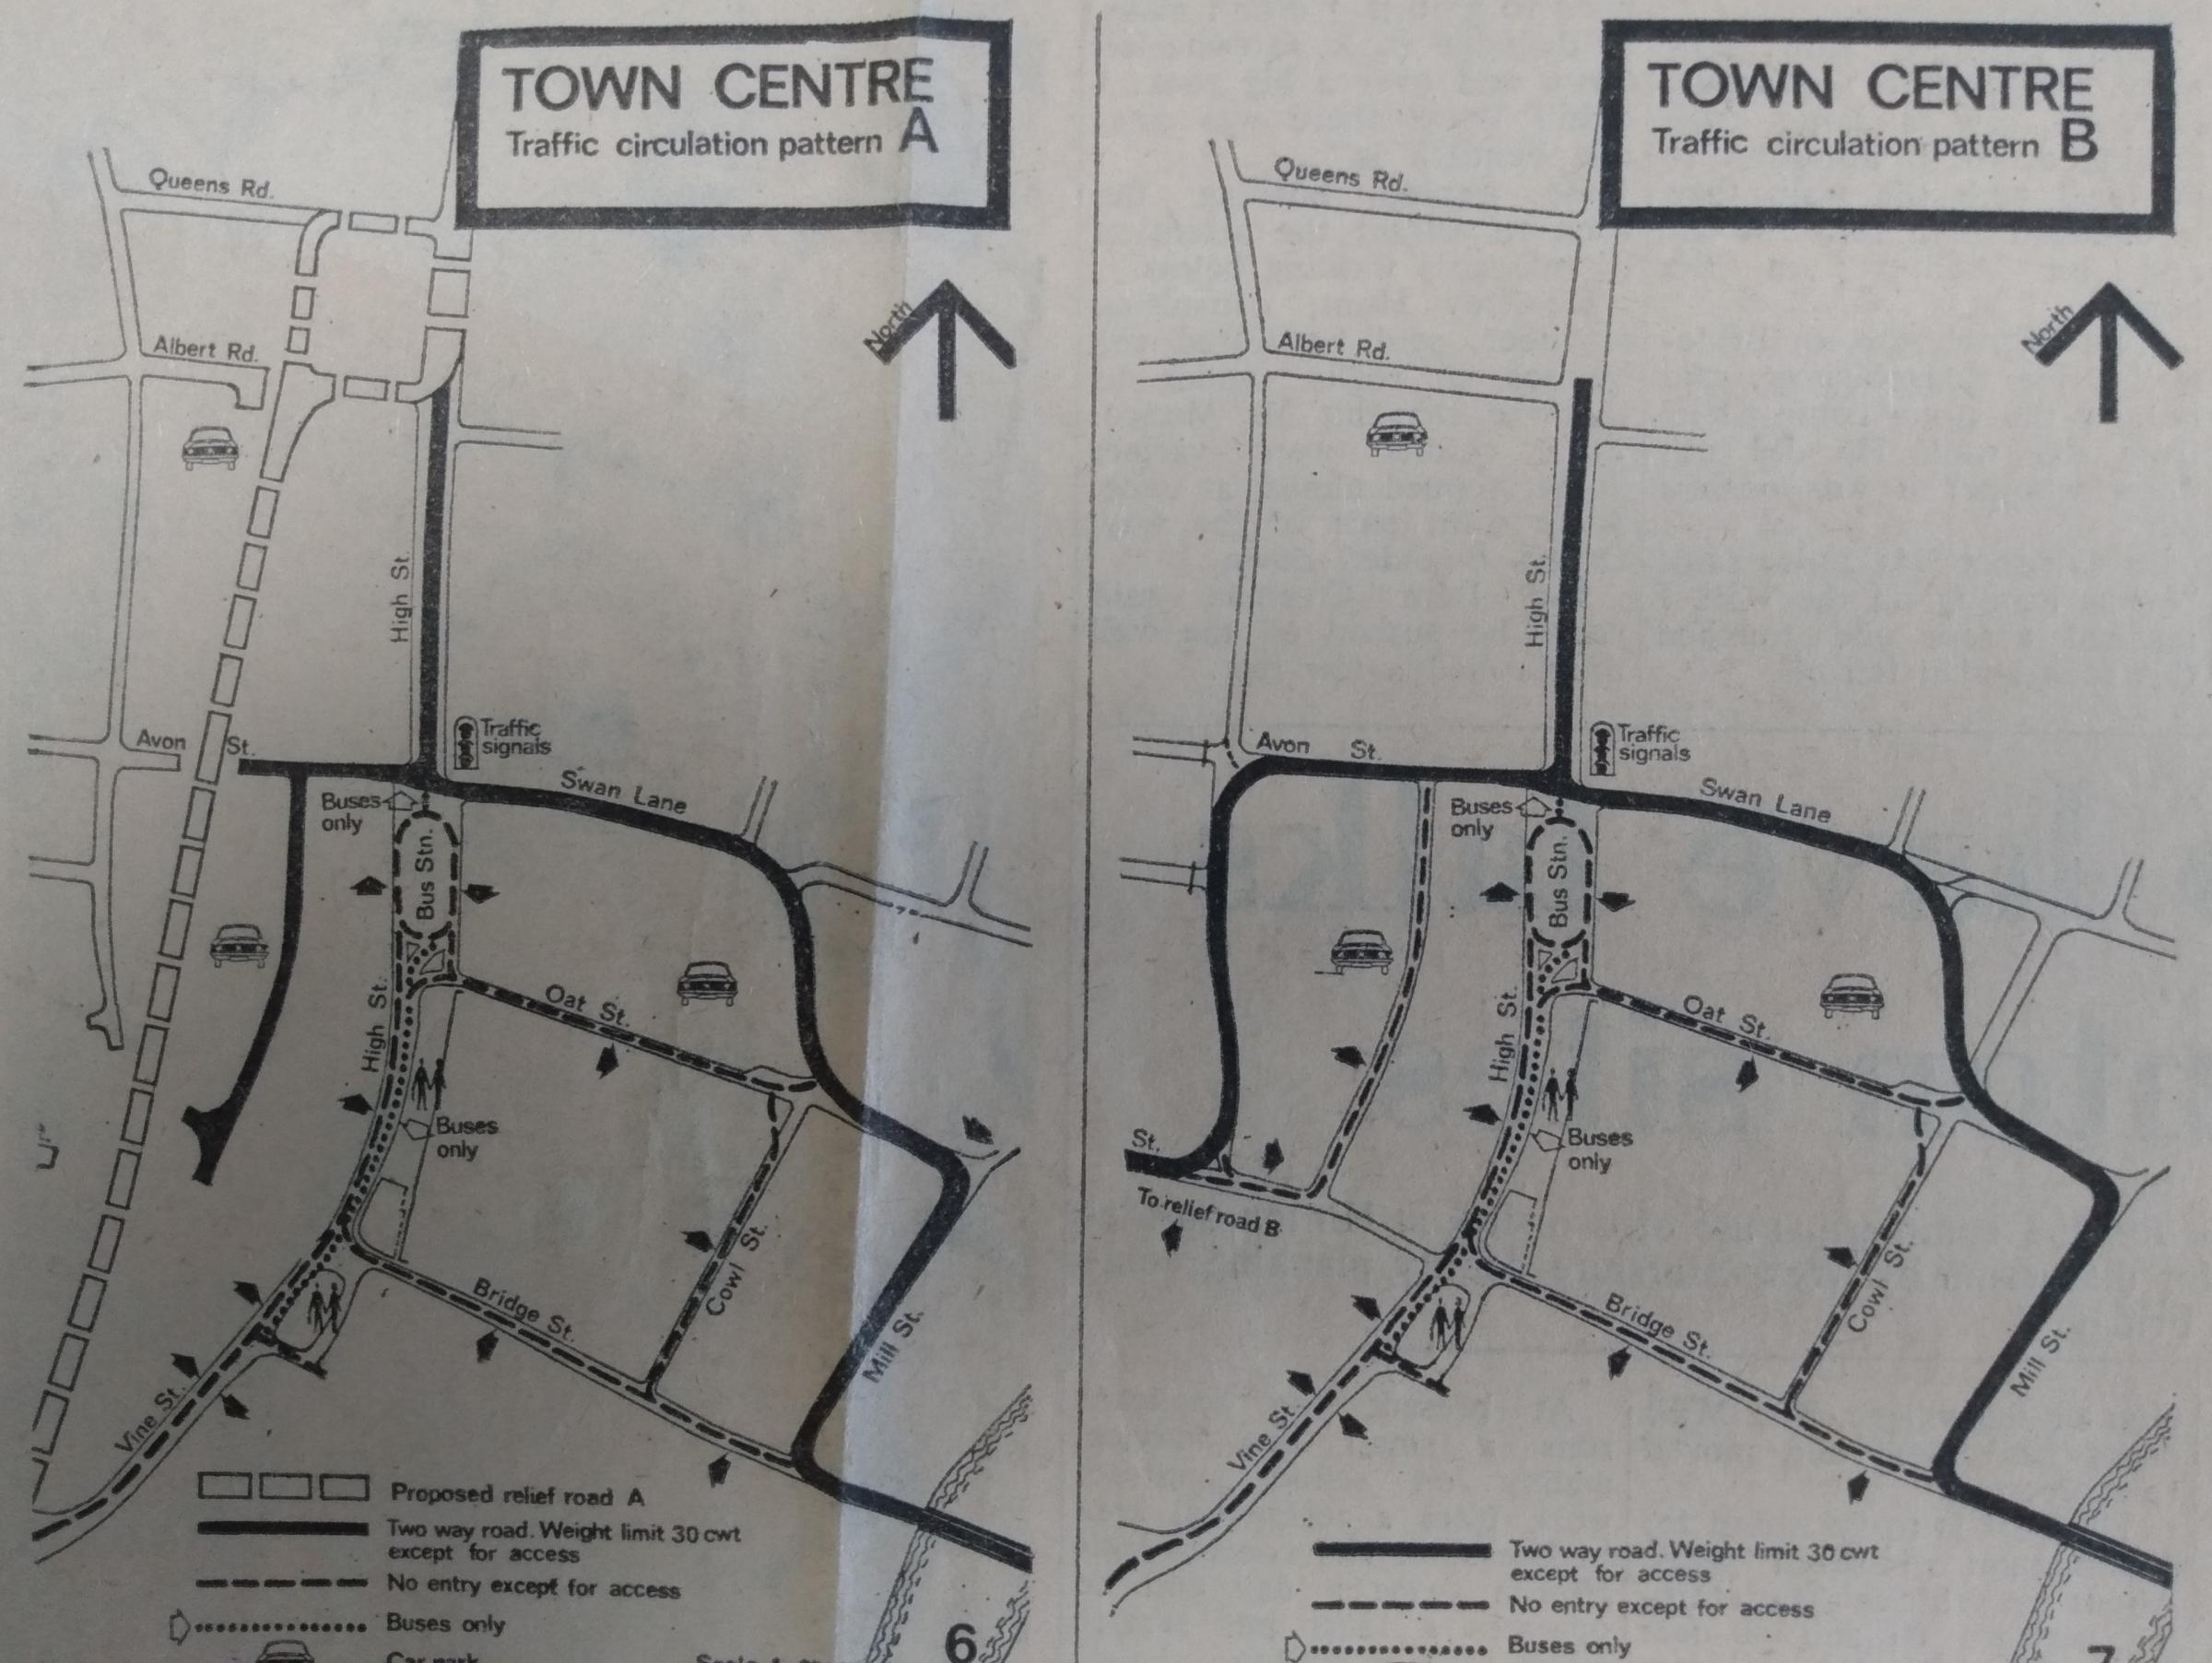 Proof that little changes over the years - this story from July 1973 which showed “A Plan for the quieter Evesham of 1986”, and two options being considered for traffic flow in the town